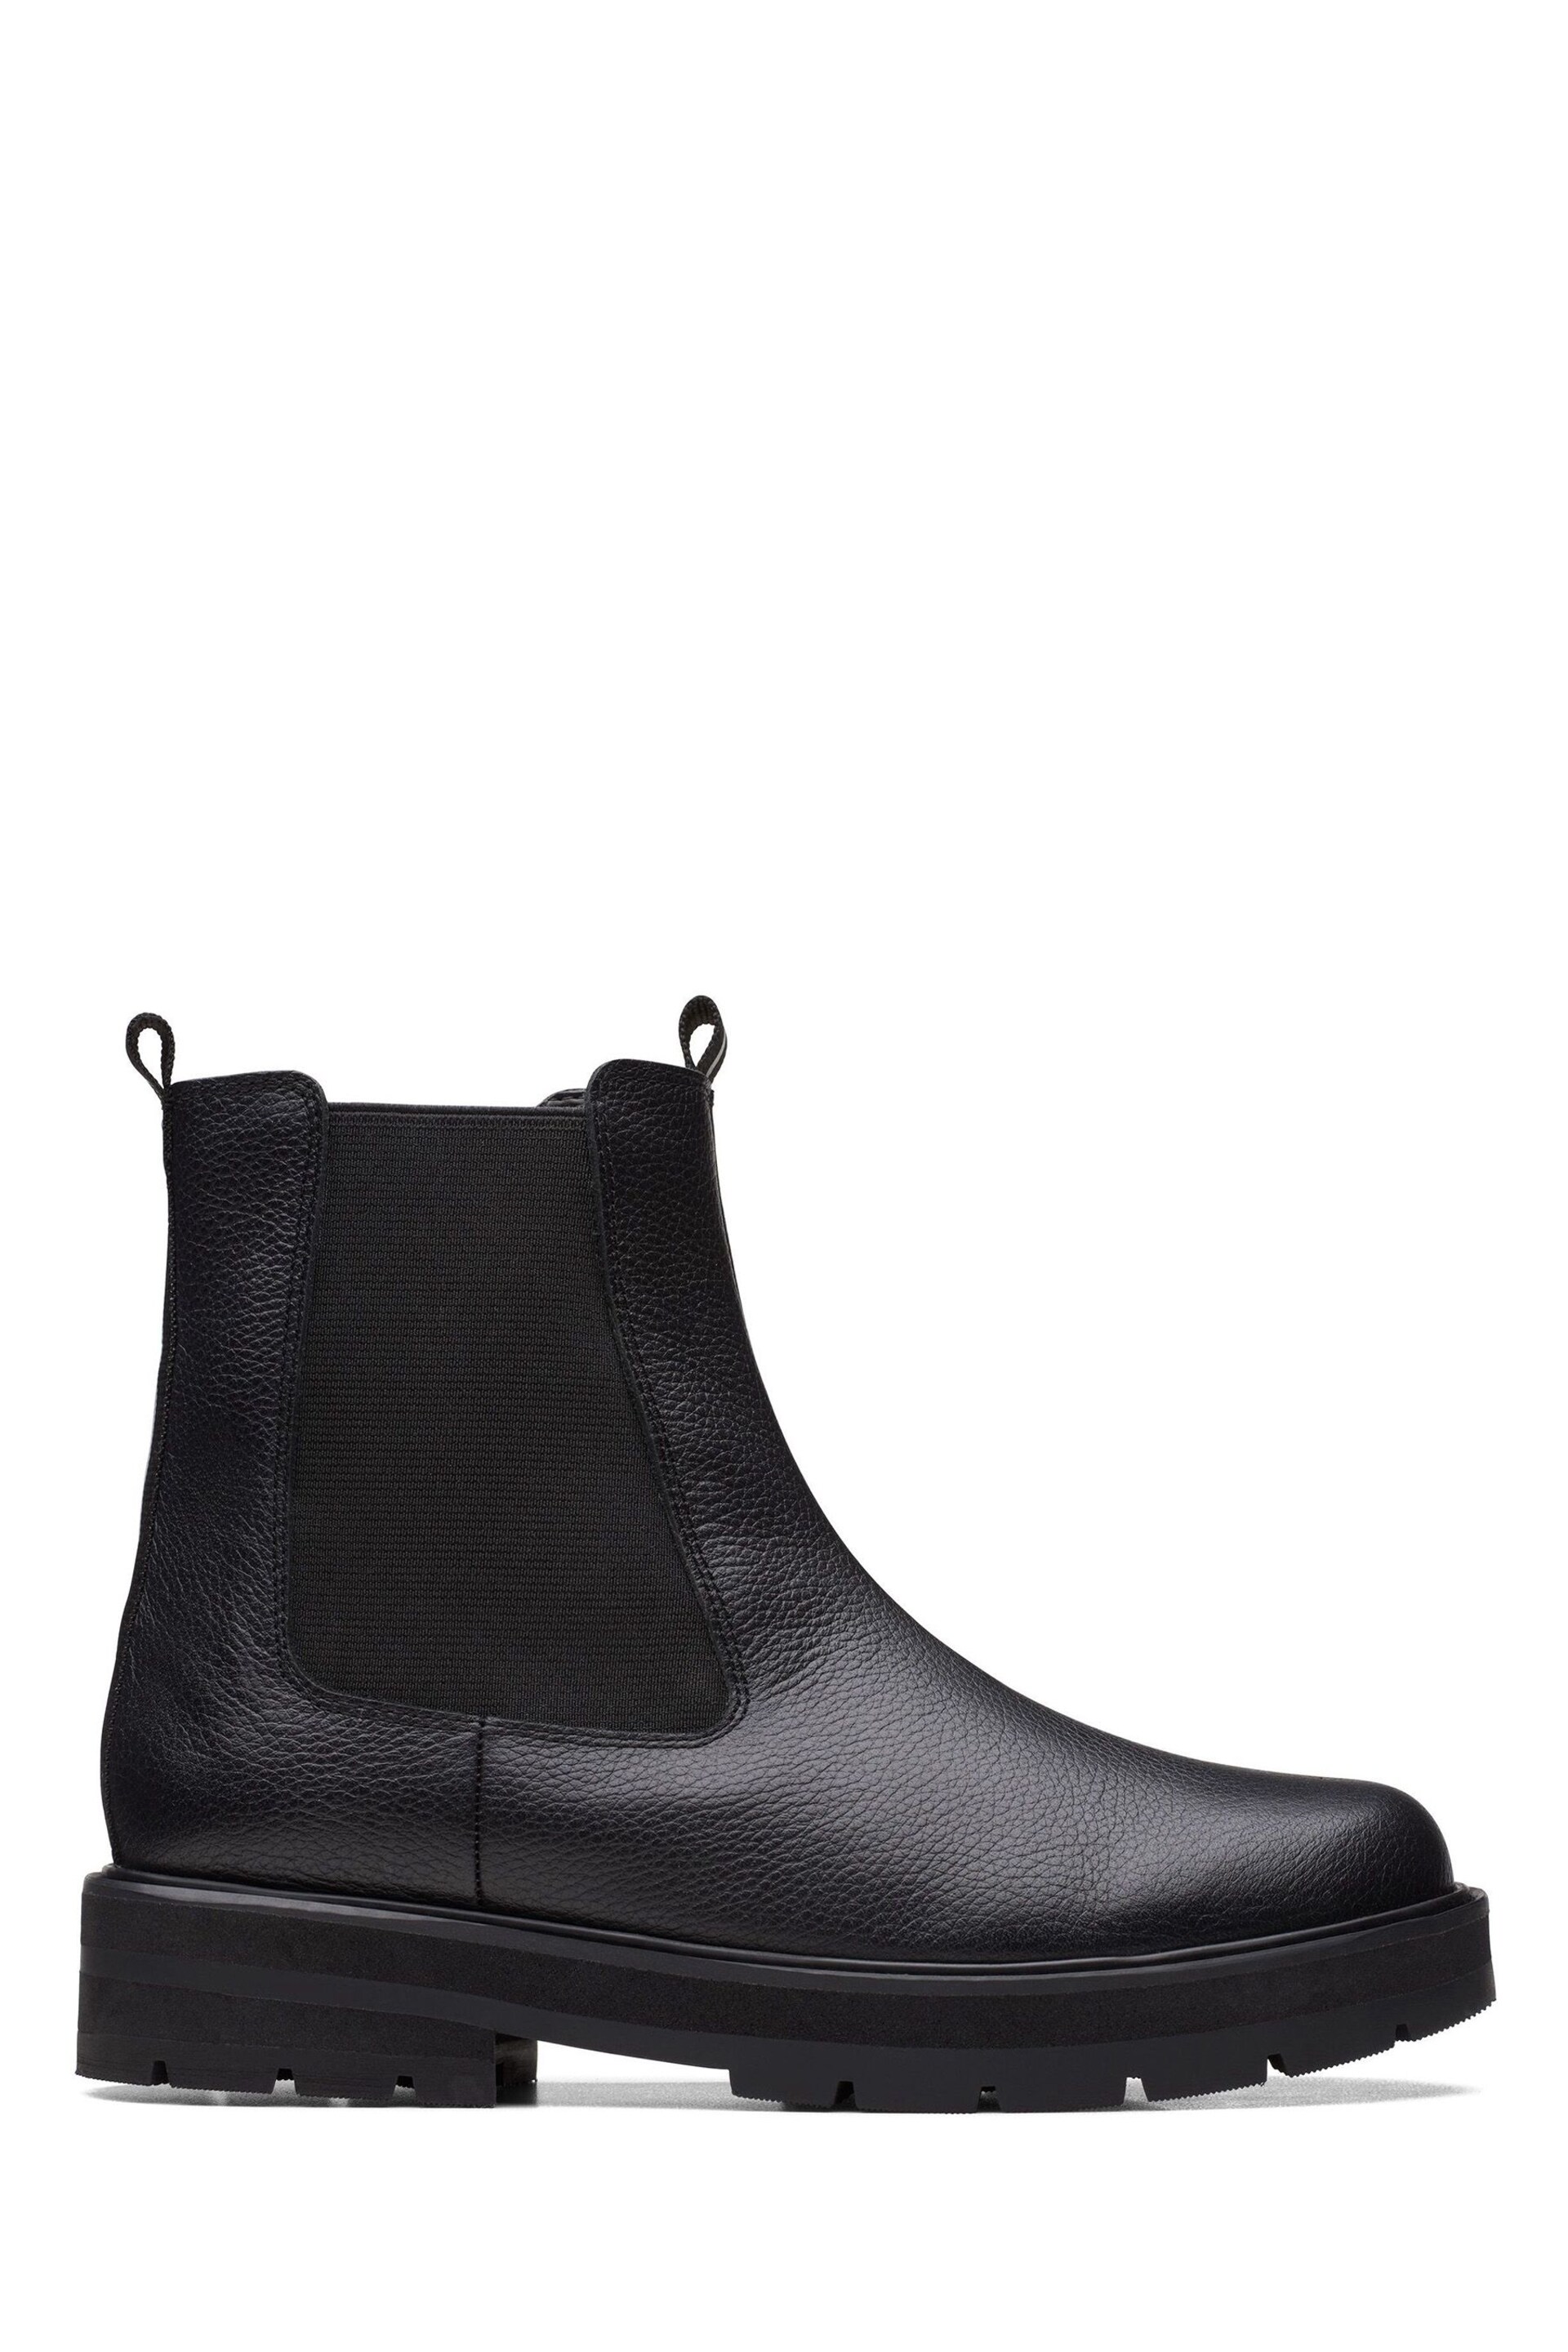 Clarks Black Multi Fit Youth Prague Boots - Image 1 of 7